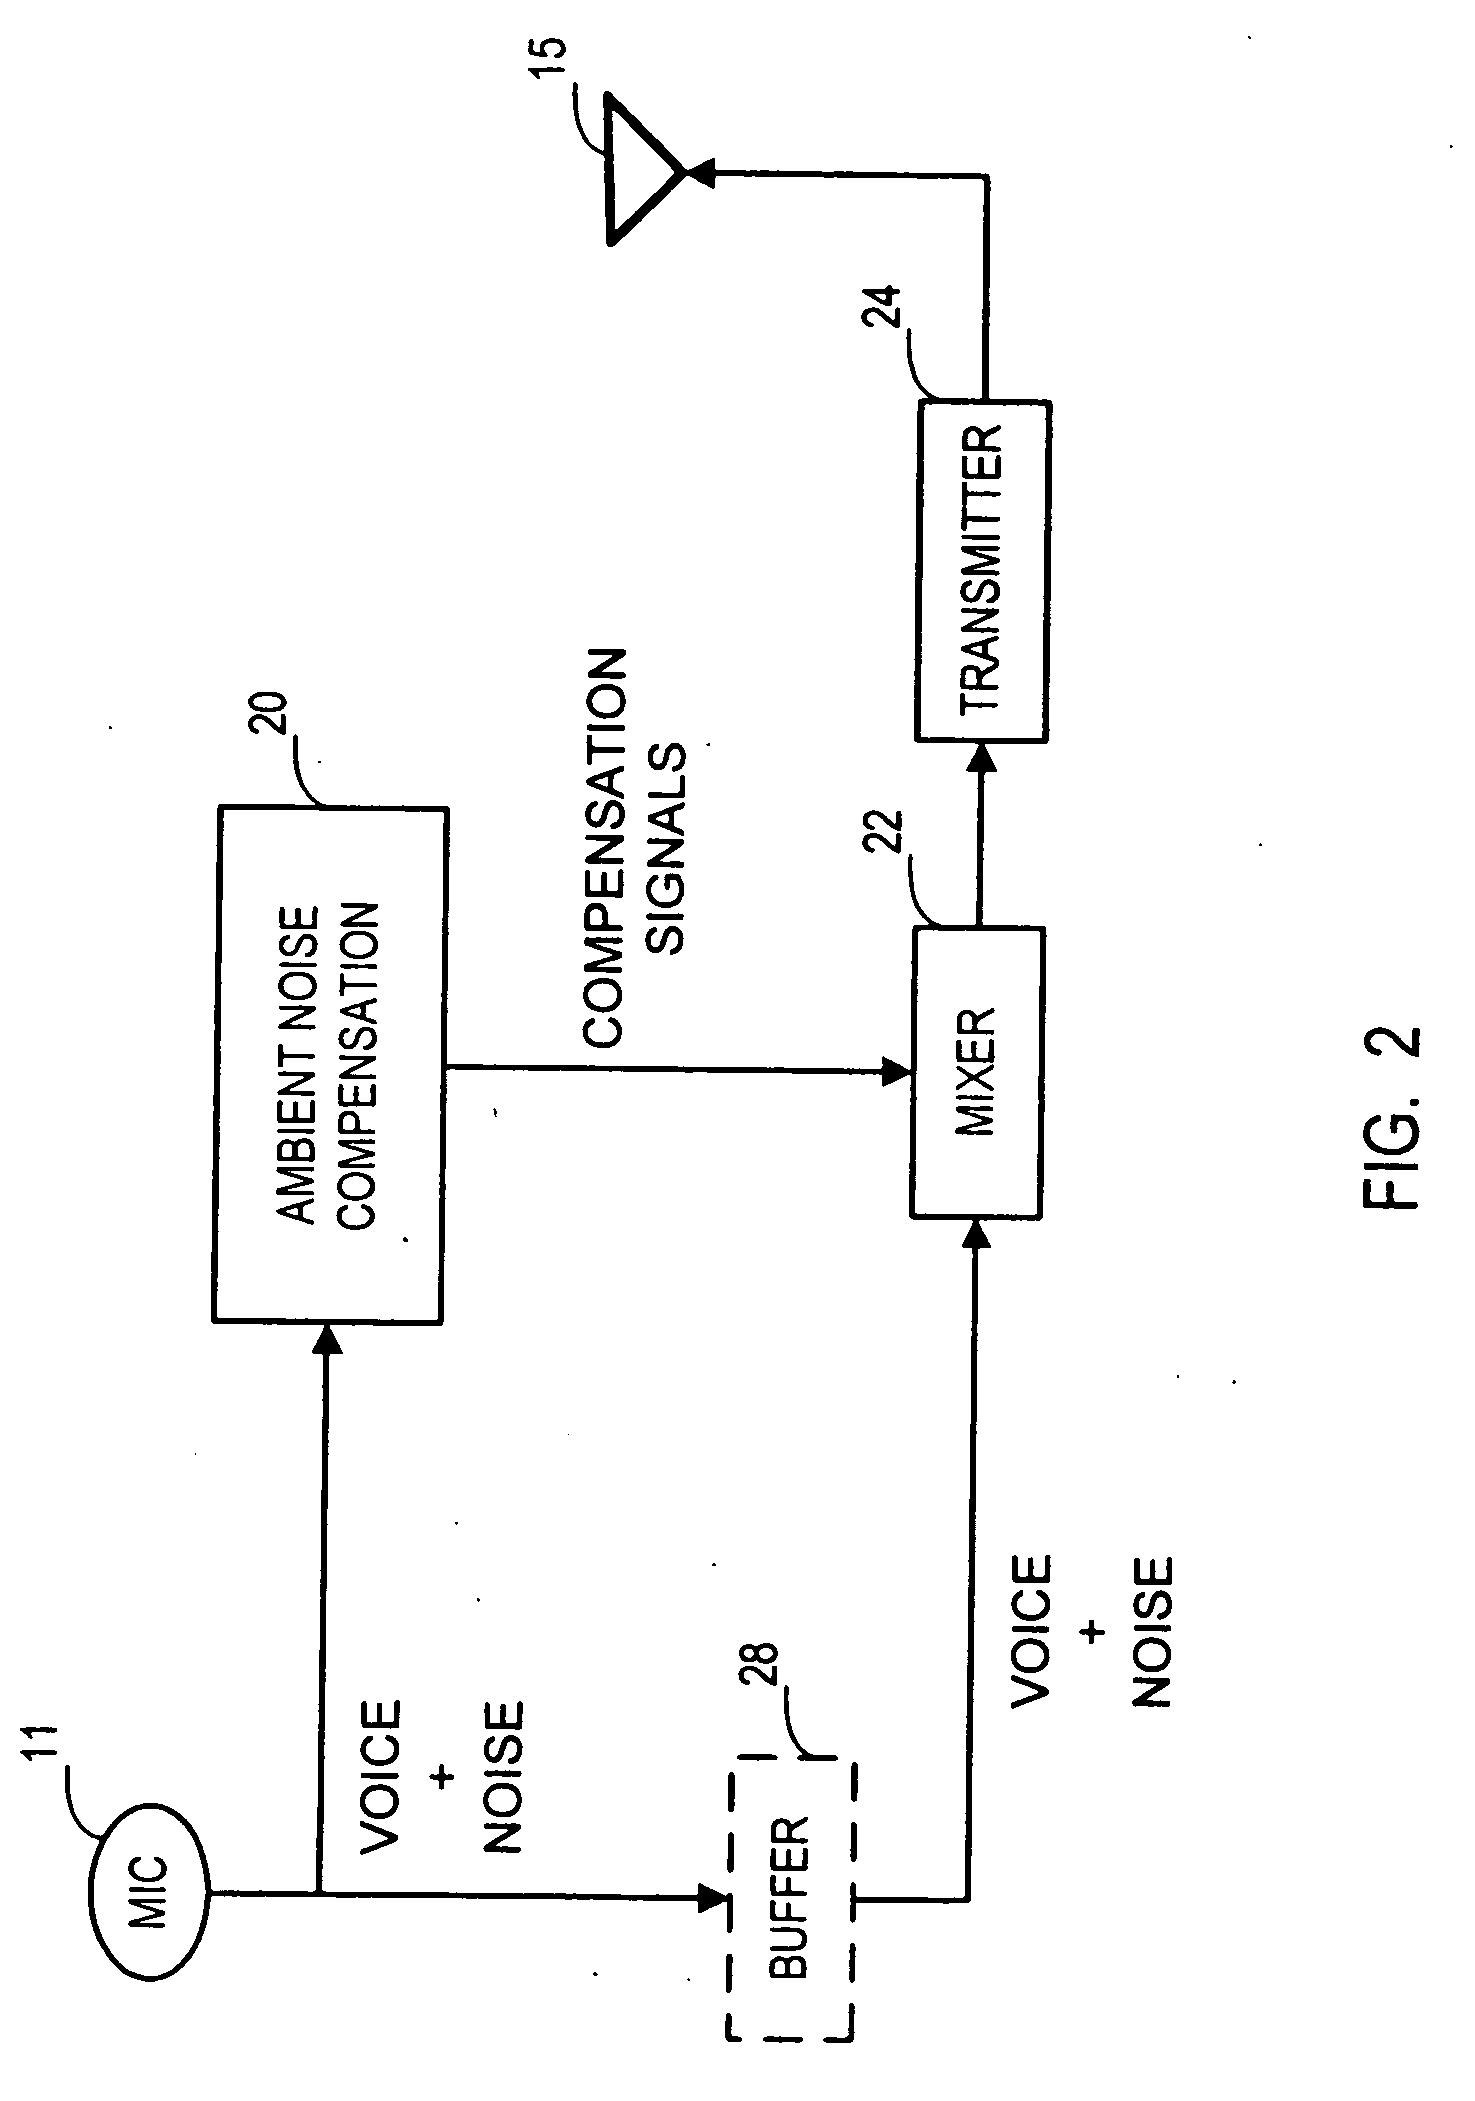 Ambient noise cancellation for voice communication device